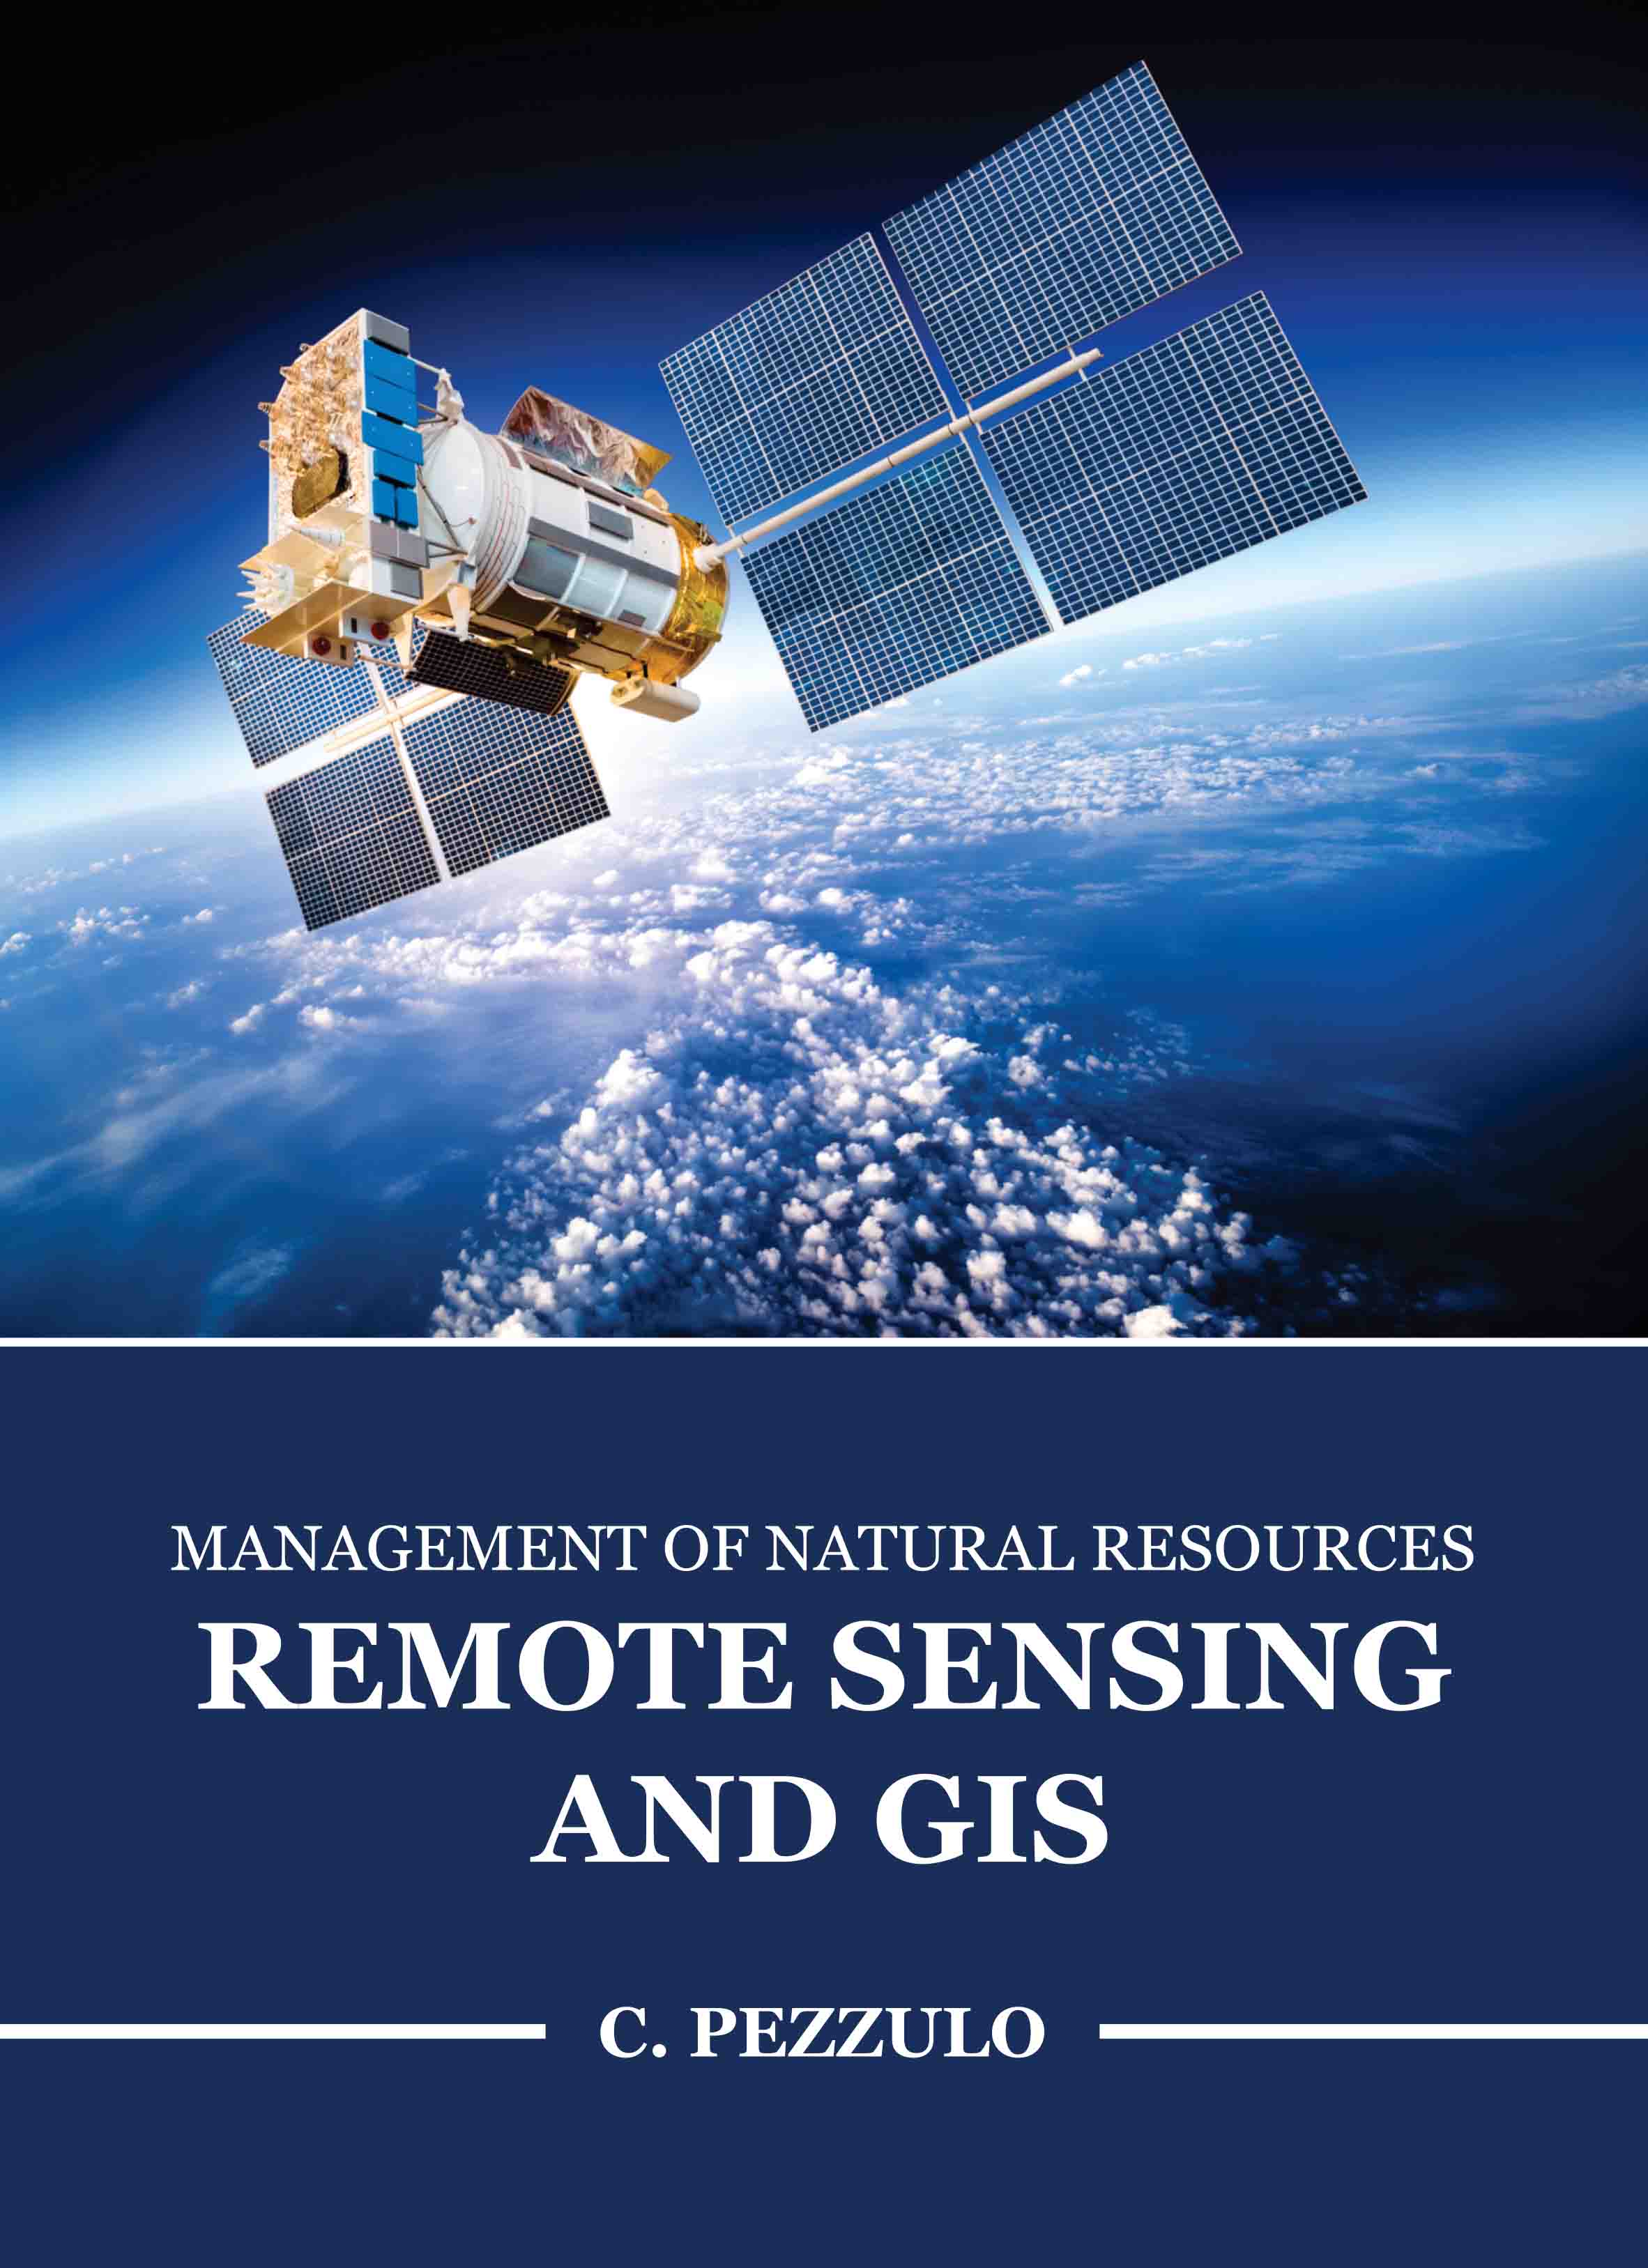 Management of Natural Resources: Remote Sensing and GIS